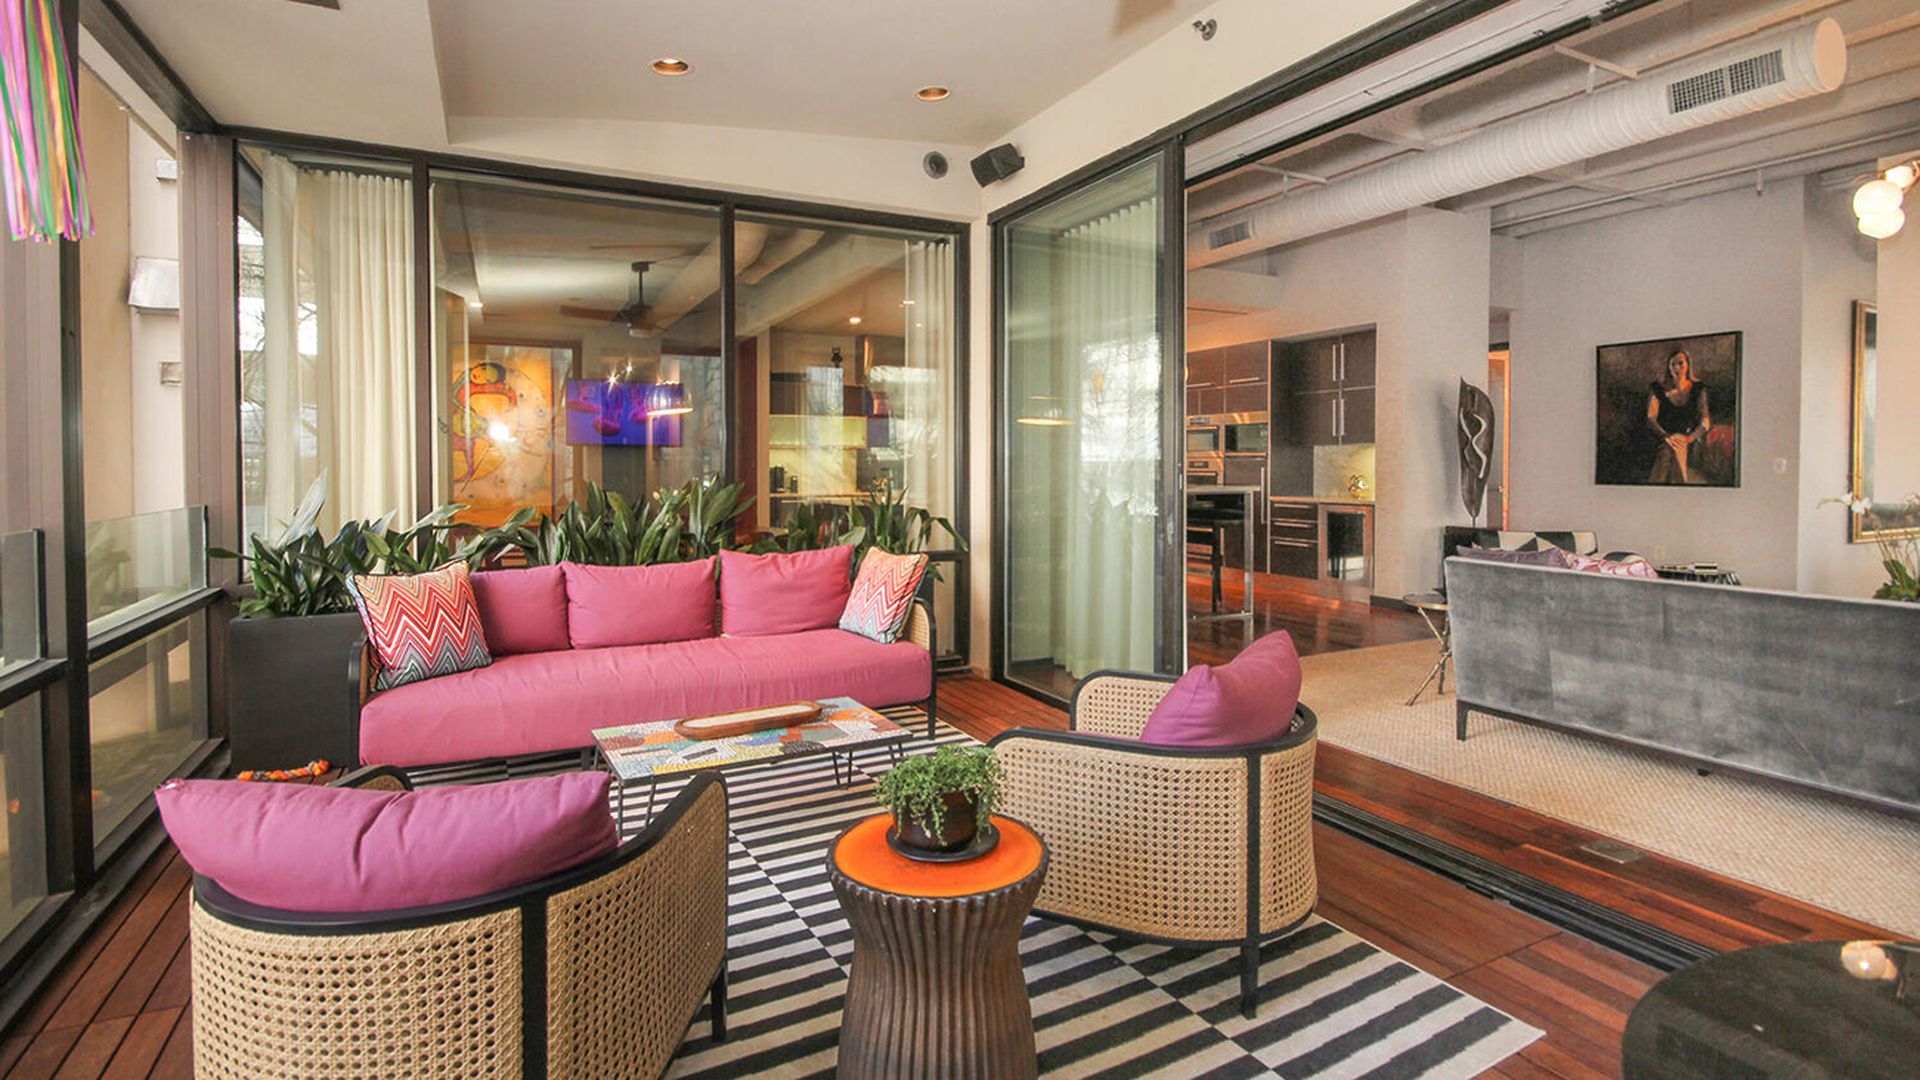 Porch converted into an outdoor living space. It has large floor-to-ceiling glass doors and the pink couches on a black and white striped rug. 